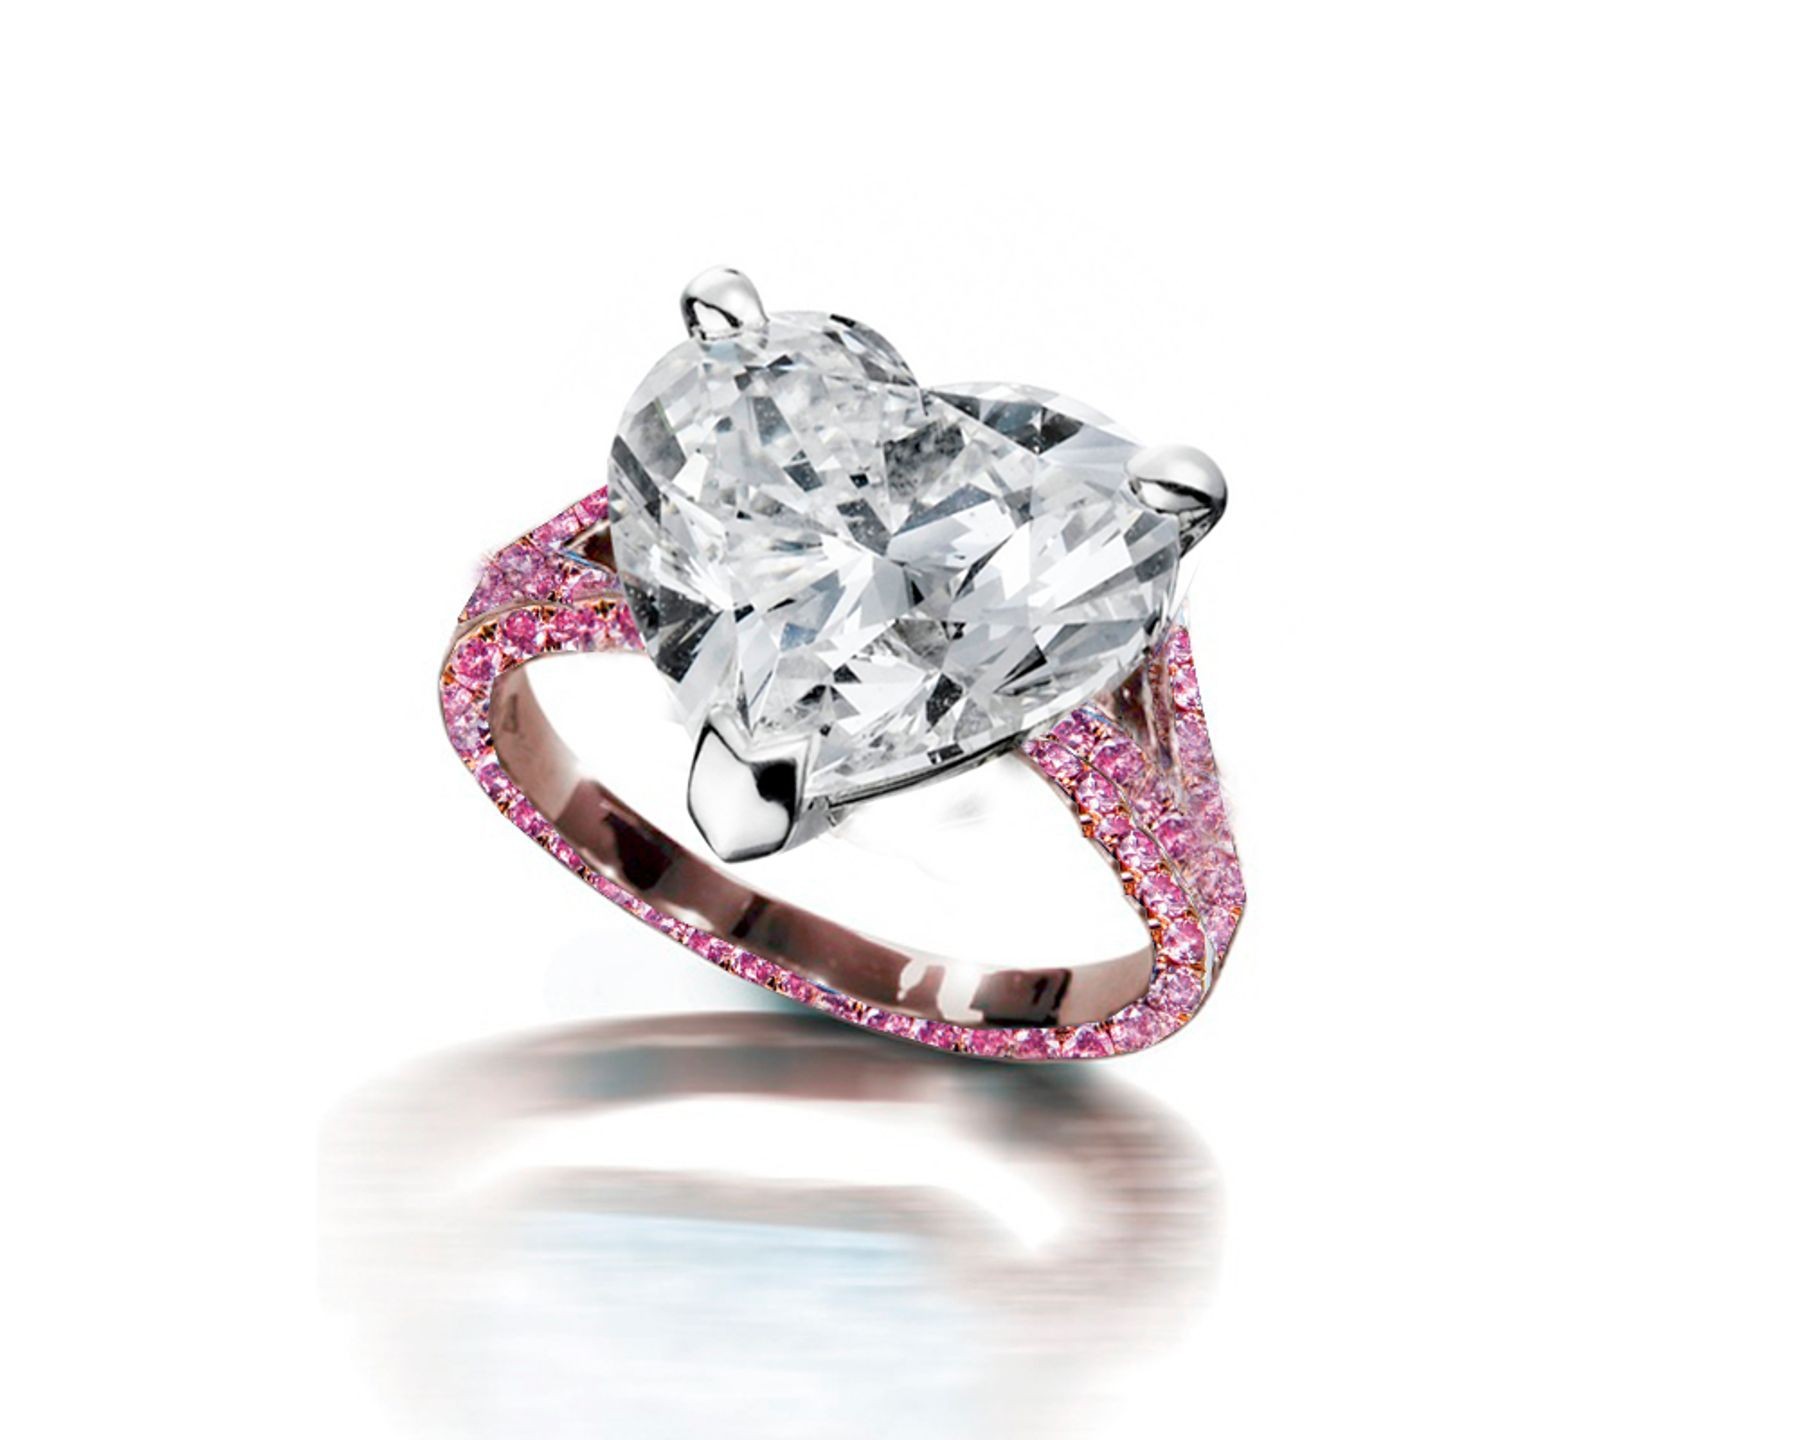 Ring with Heart Diamond & Pave Set Pink Sapphires in Gold or Platinum